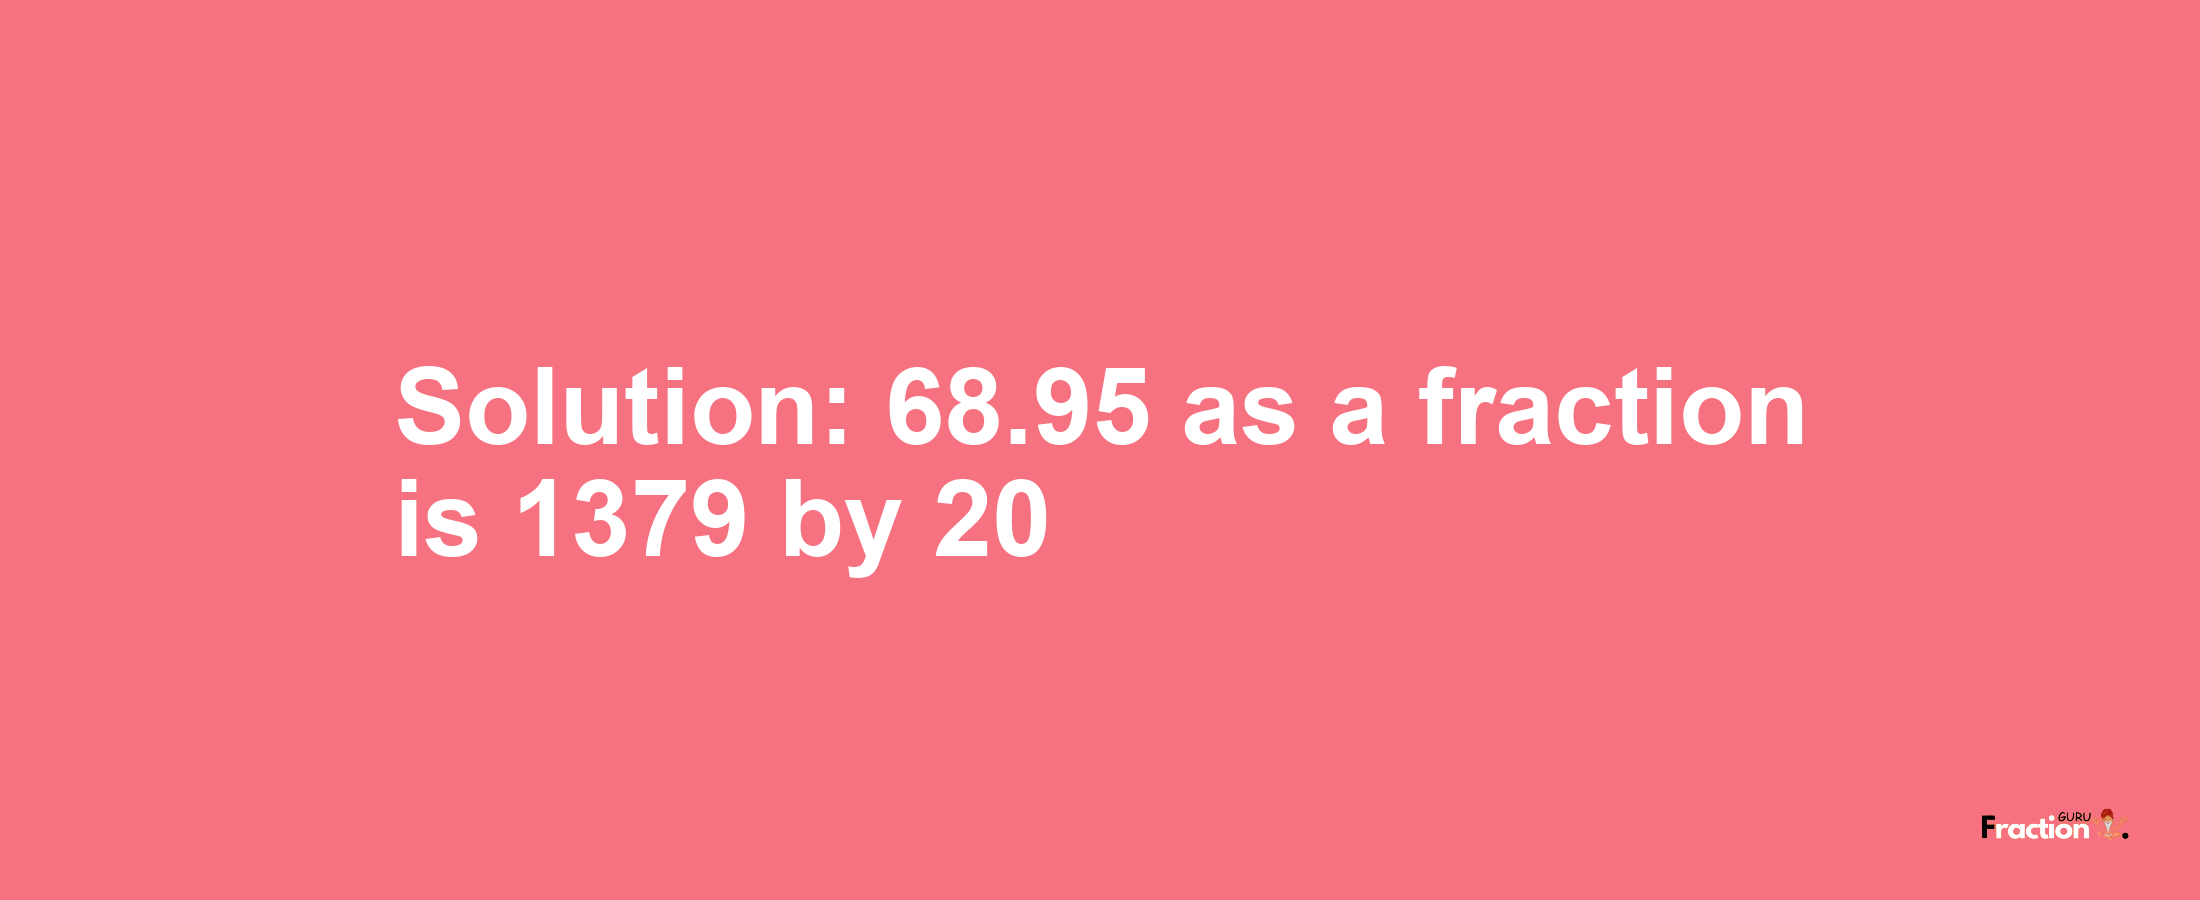 Solution:68.95 as a fraction is 1379/20